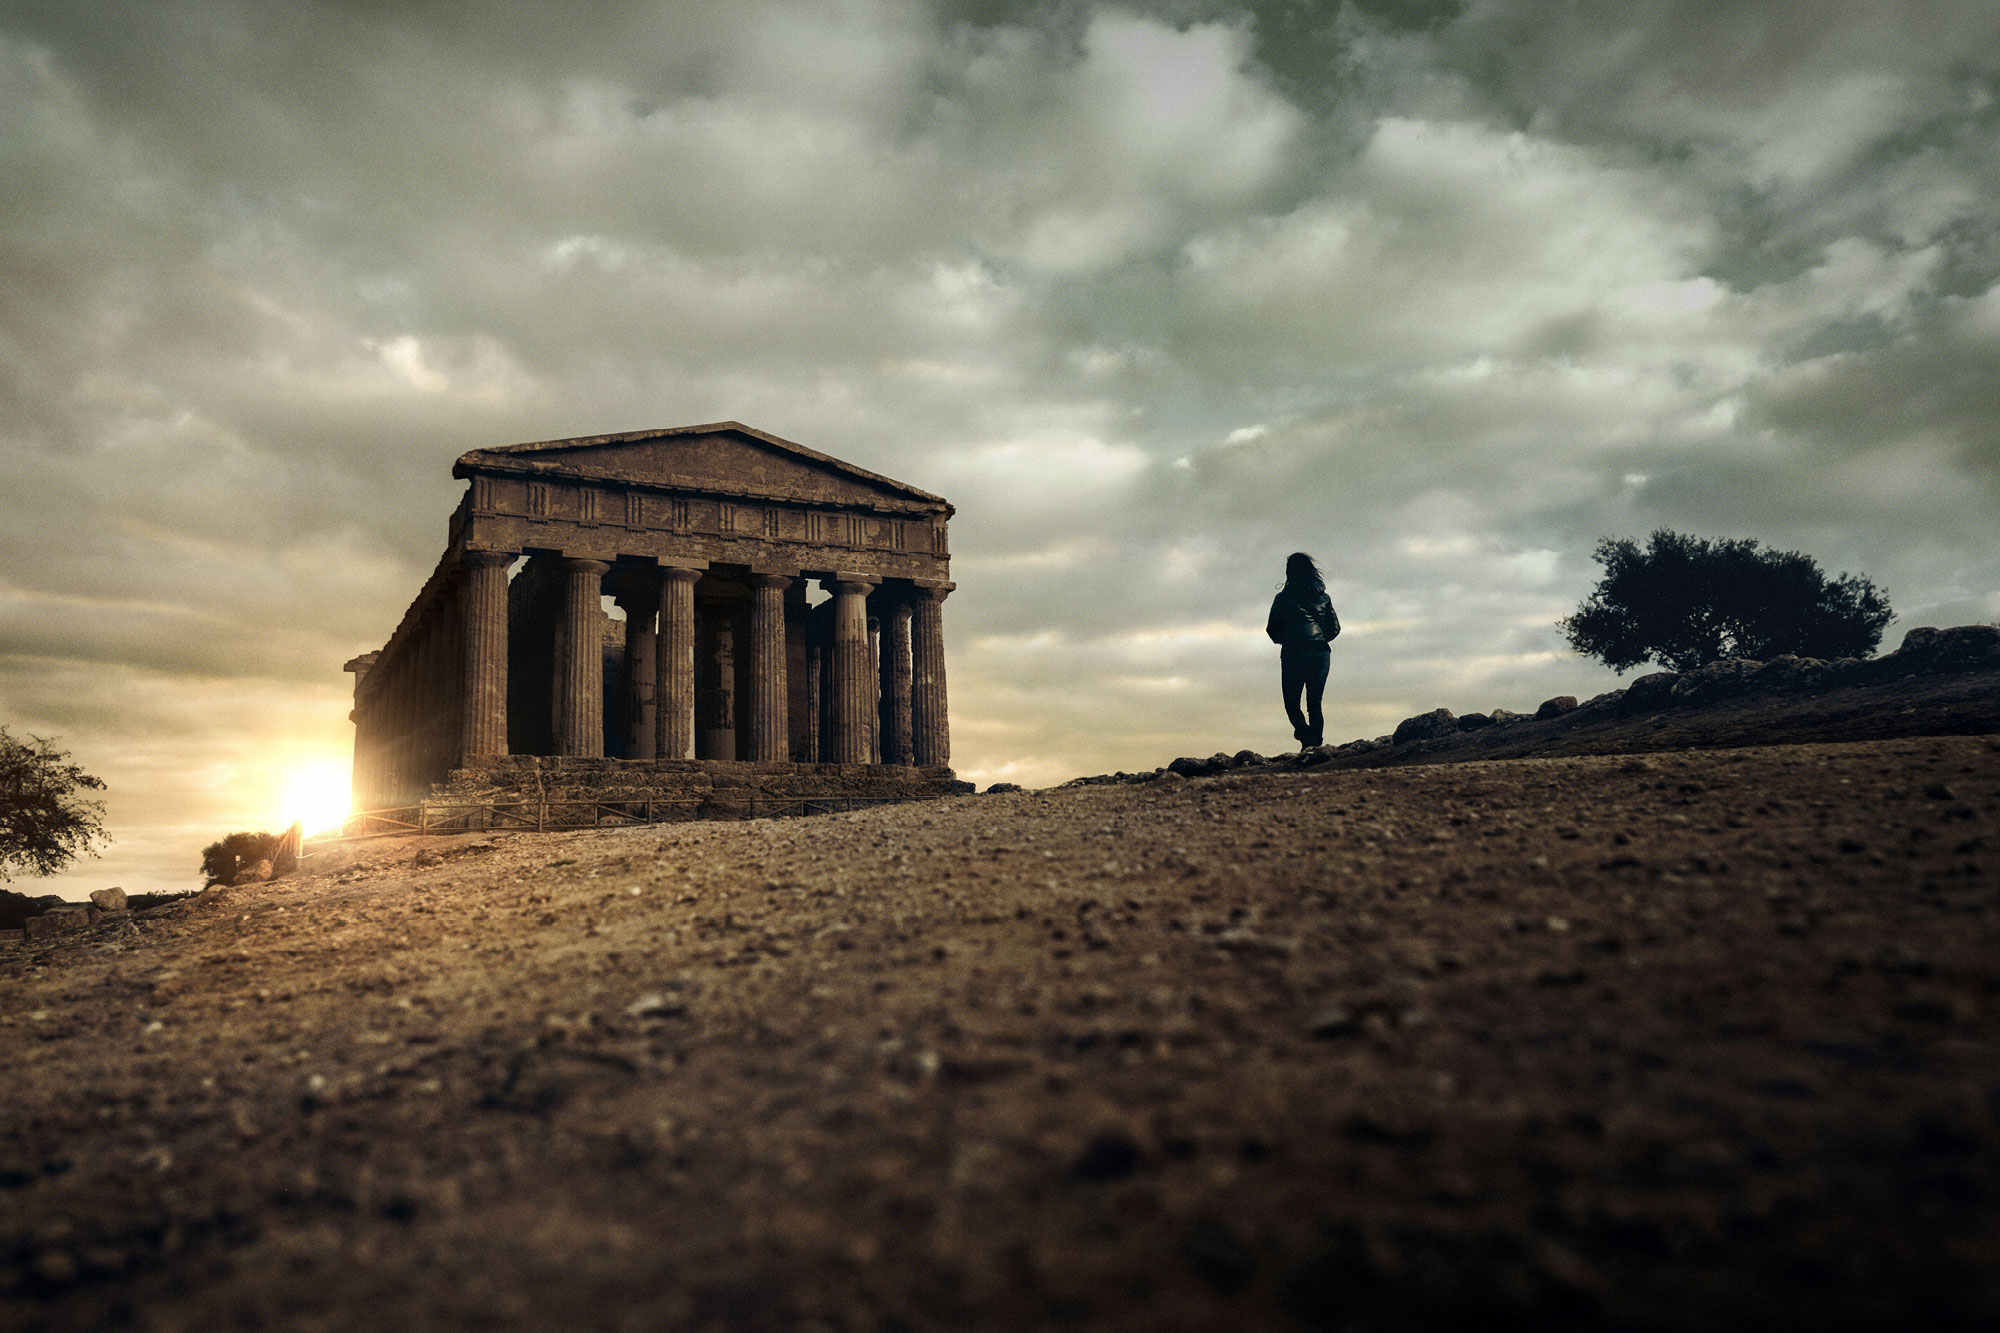 Valley of the temples Sicily, landscape photography